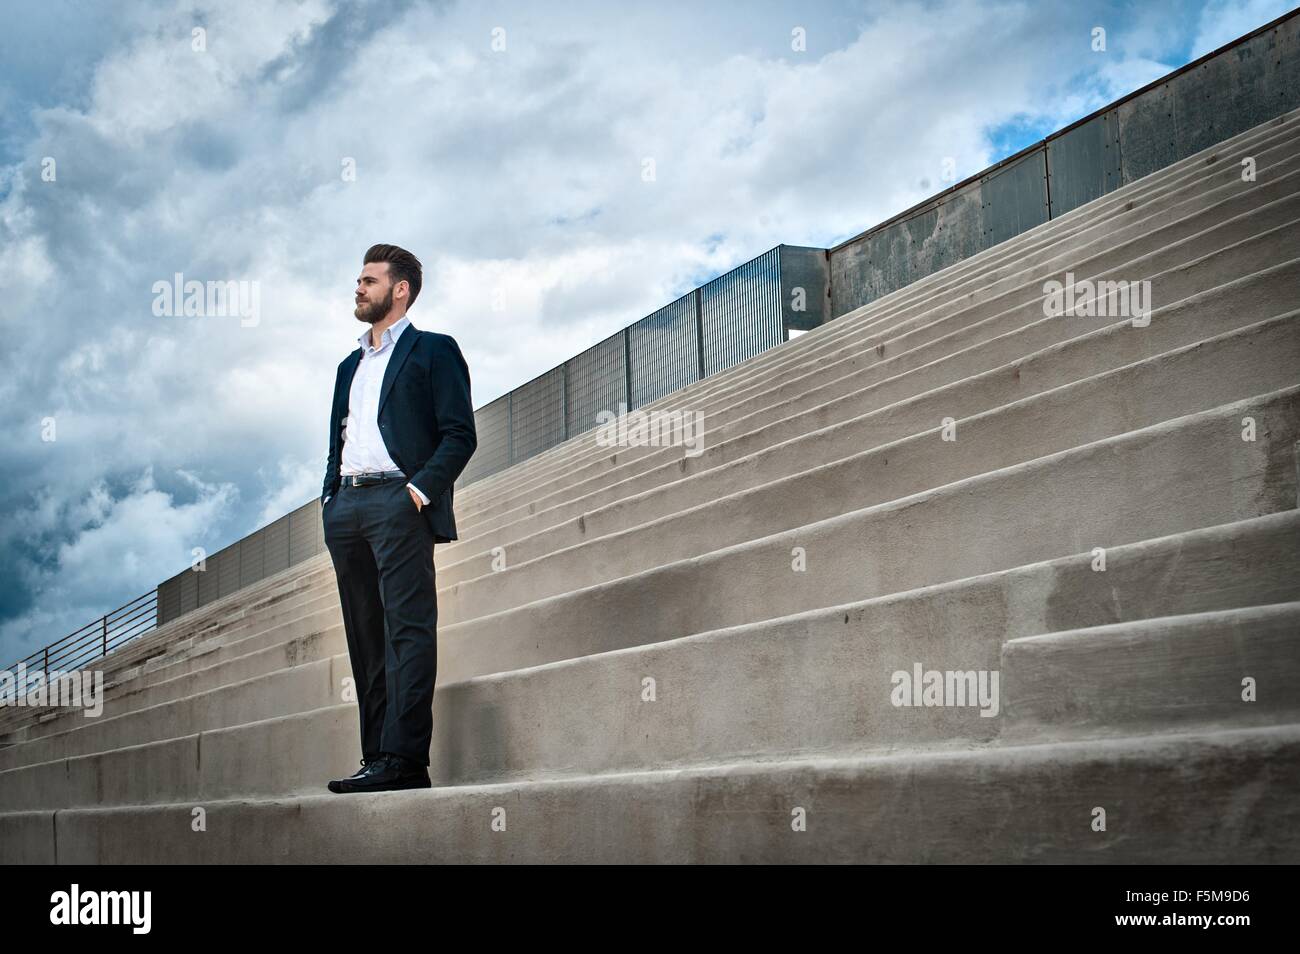 Low angle view of mid adult man on steps wearing suit, hands in pockets looking away Stock Photo